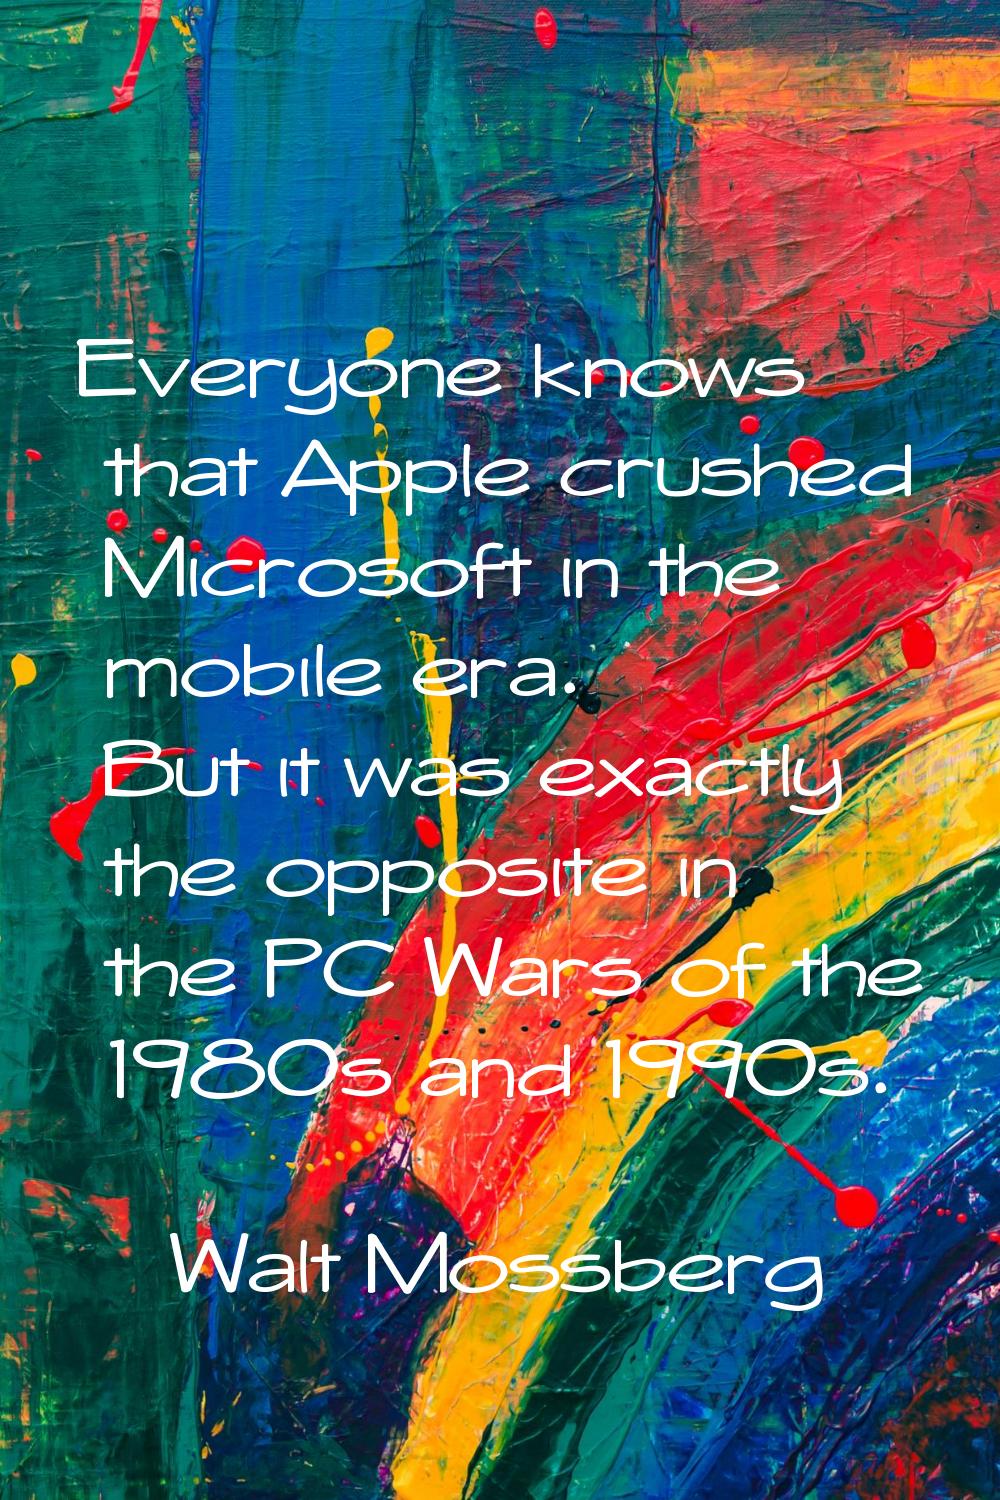 Everyone knows that Apple crushed Microsoft in the mobile era. But it was exactly the opposite in t